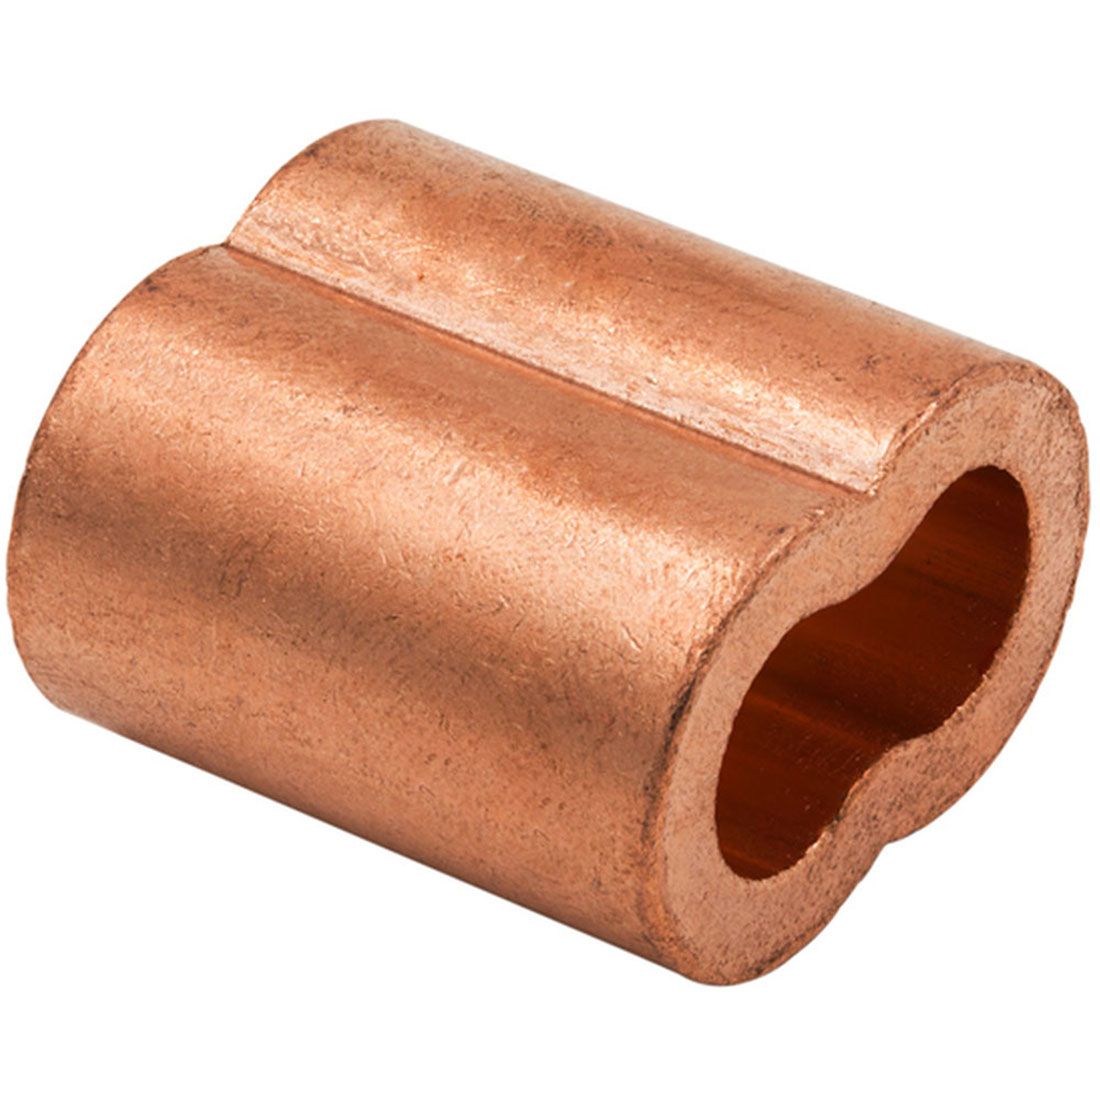 1/4" Copper Swage Sleeve